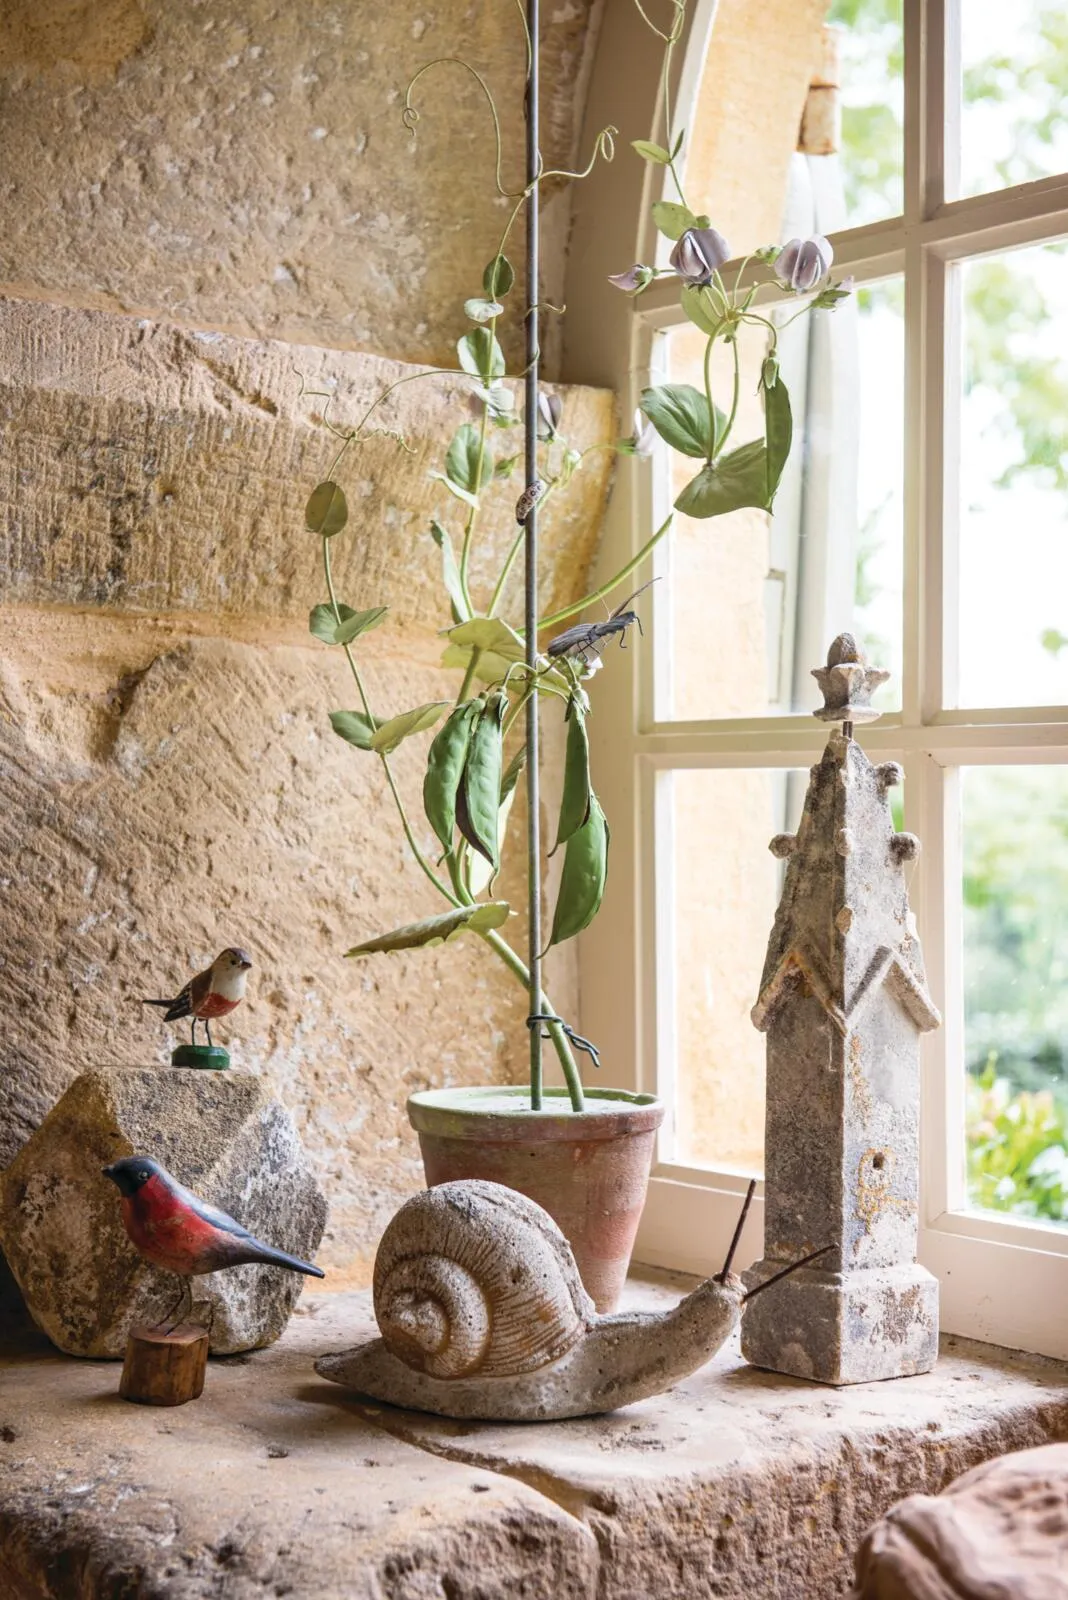 15th century farmhouse in south-west France, window sill detail.